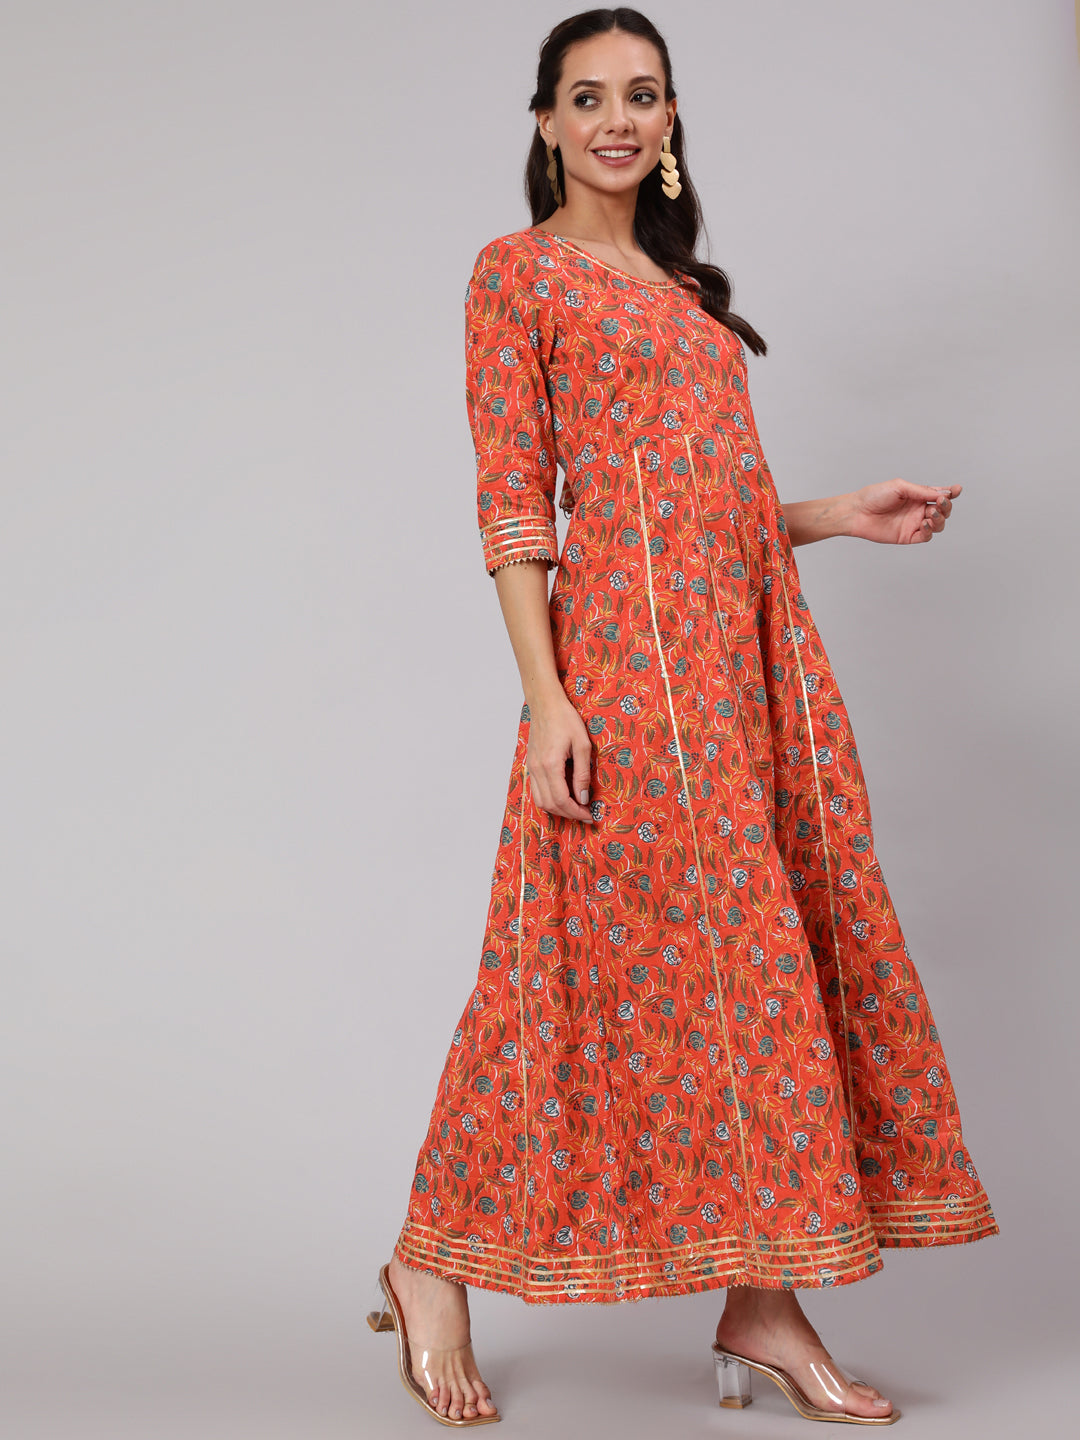 Orange Floral Printed Flared Dress With Three Quarter Sleeves